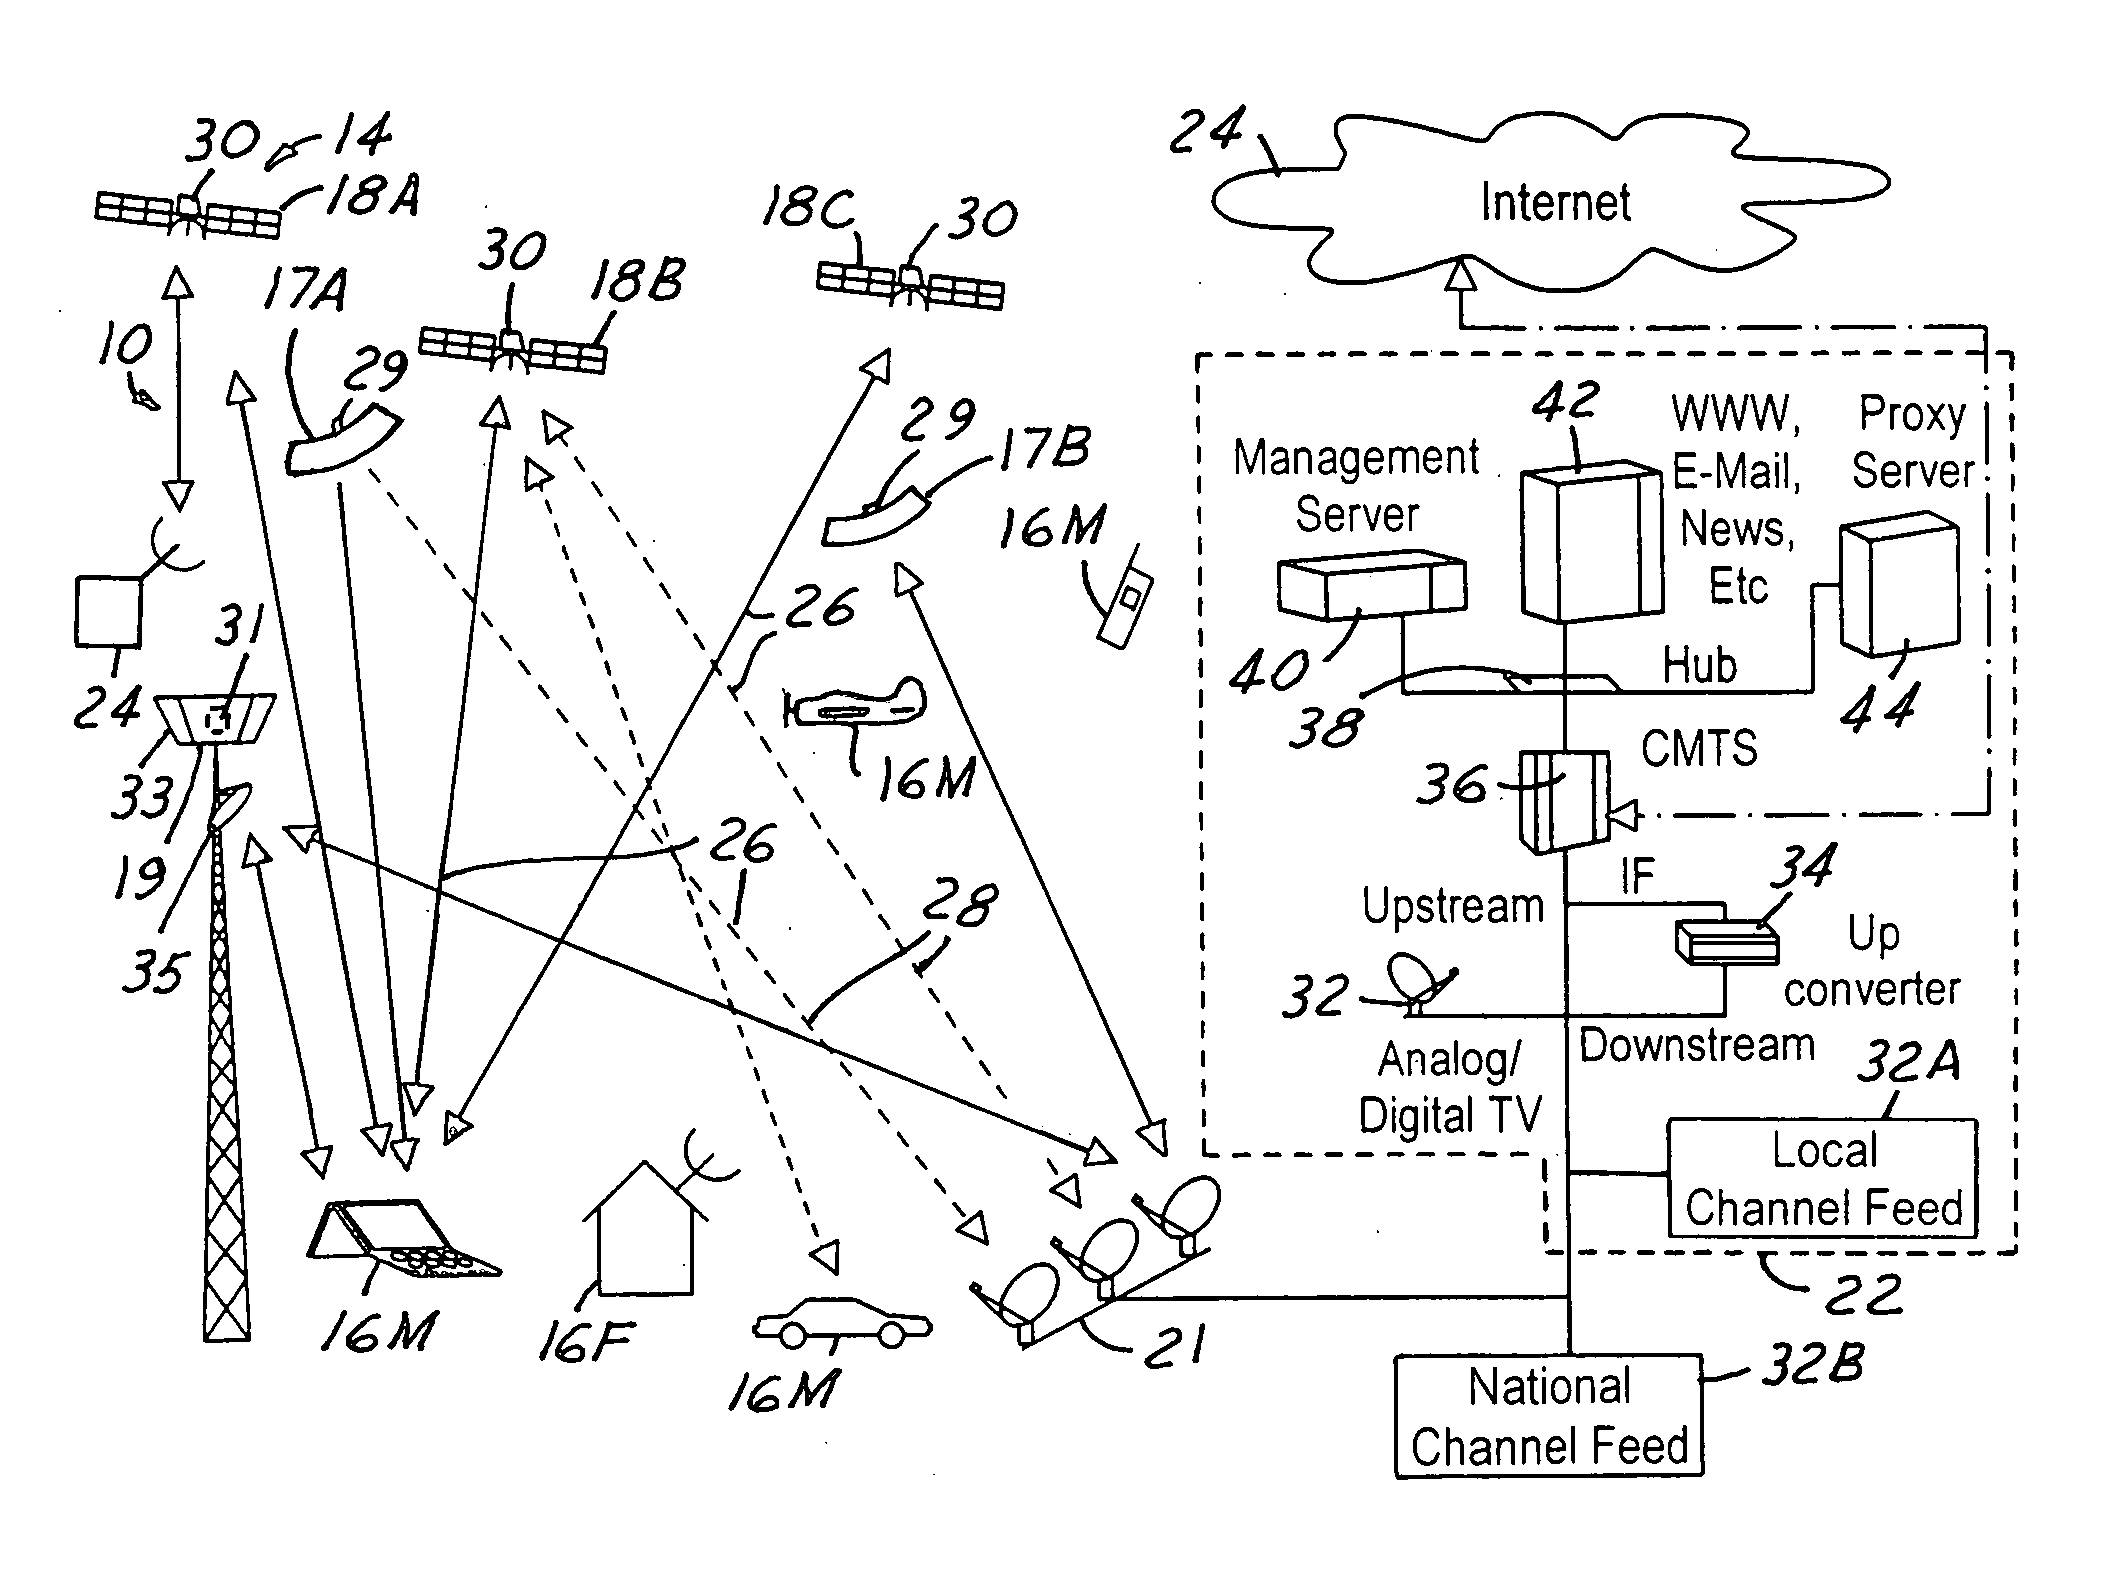 Communication system using multiple link terminals for aircraft